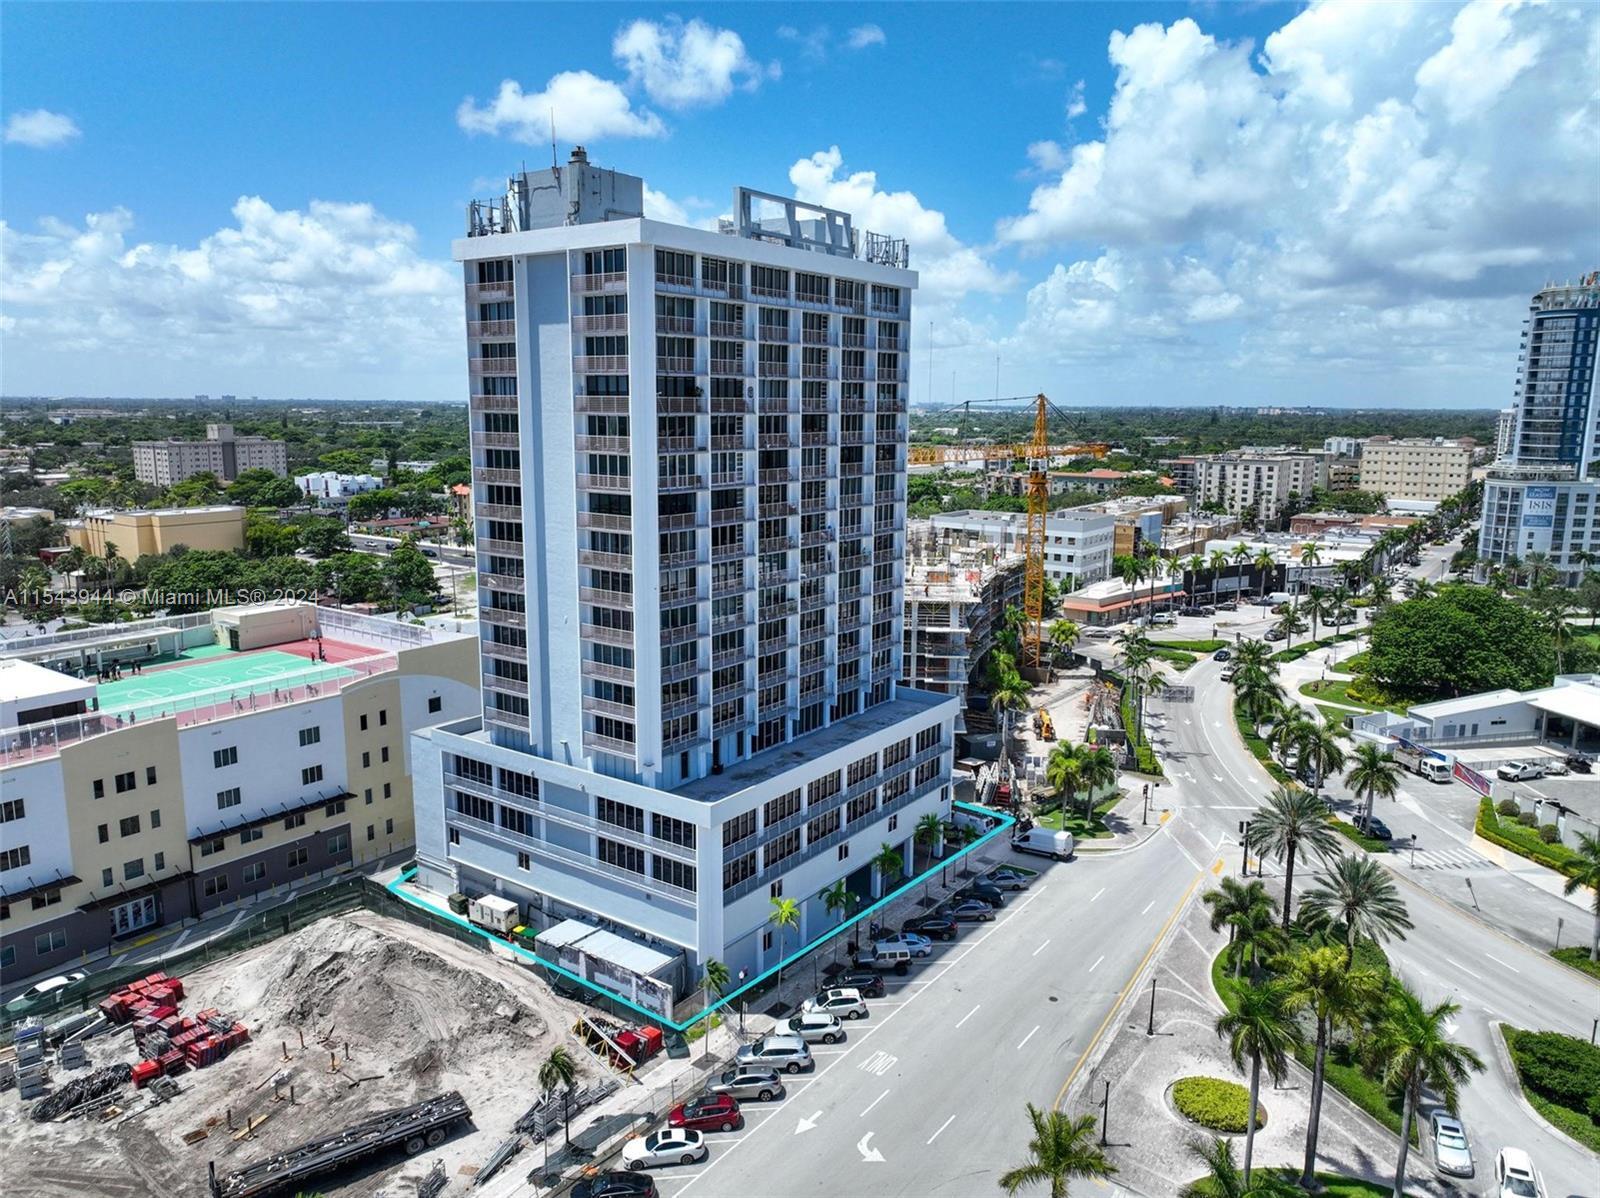 Photo of 1720 Harrison St #9G in Hollywood, FL